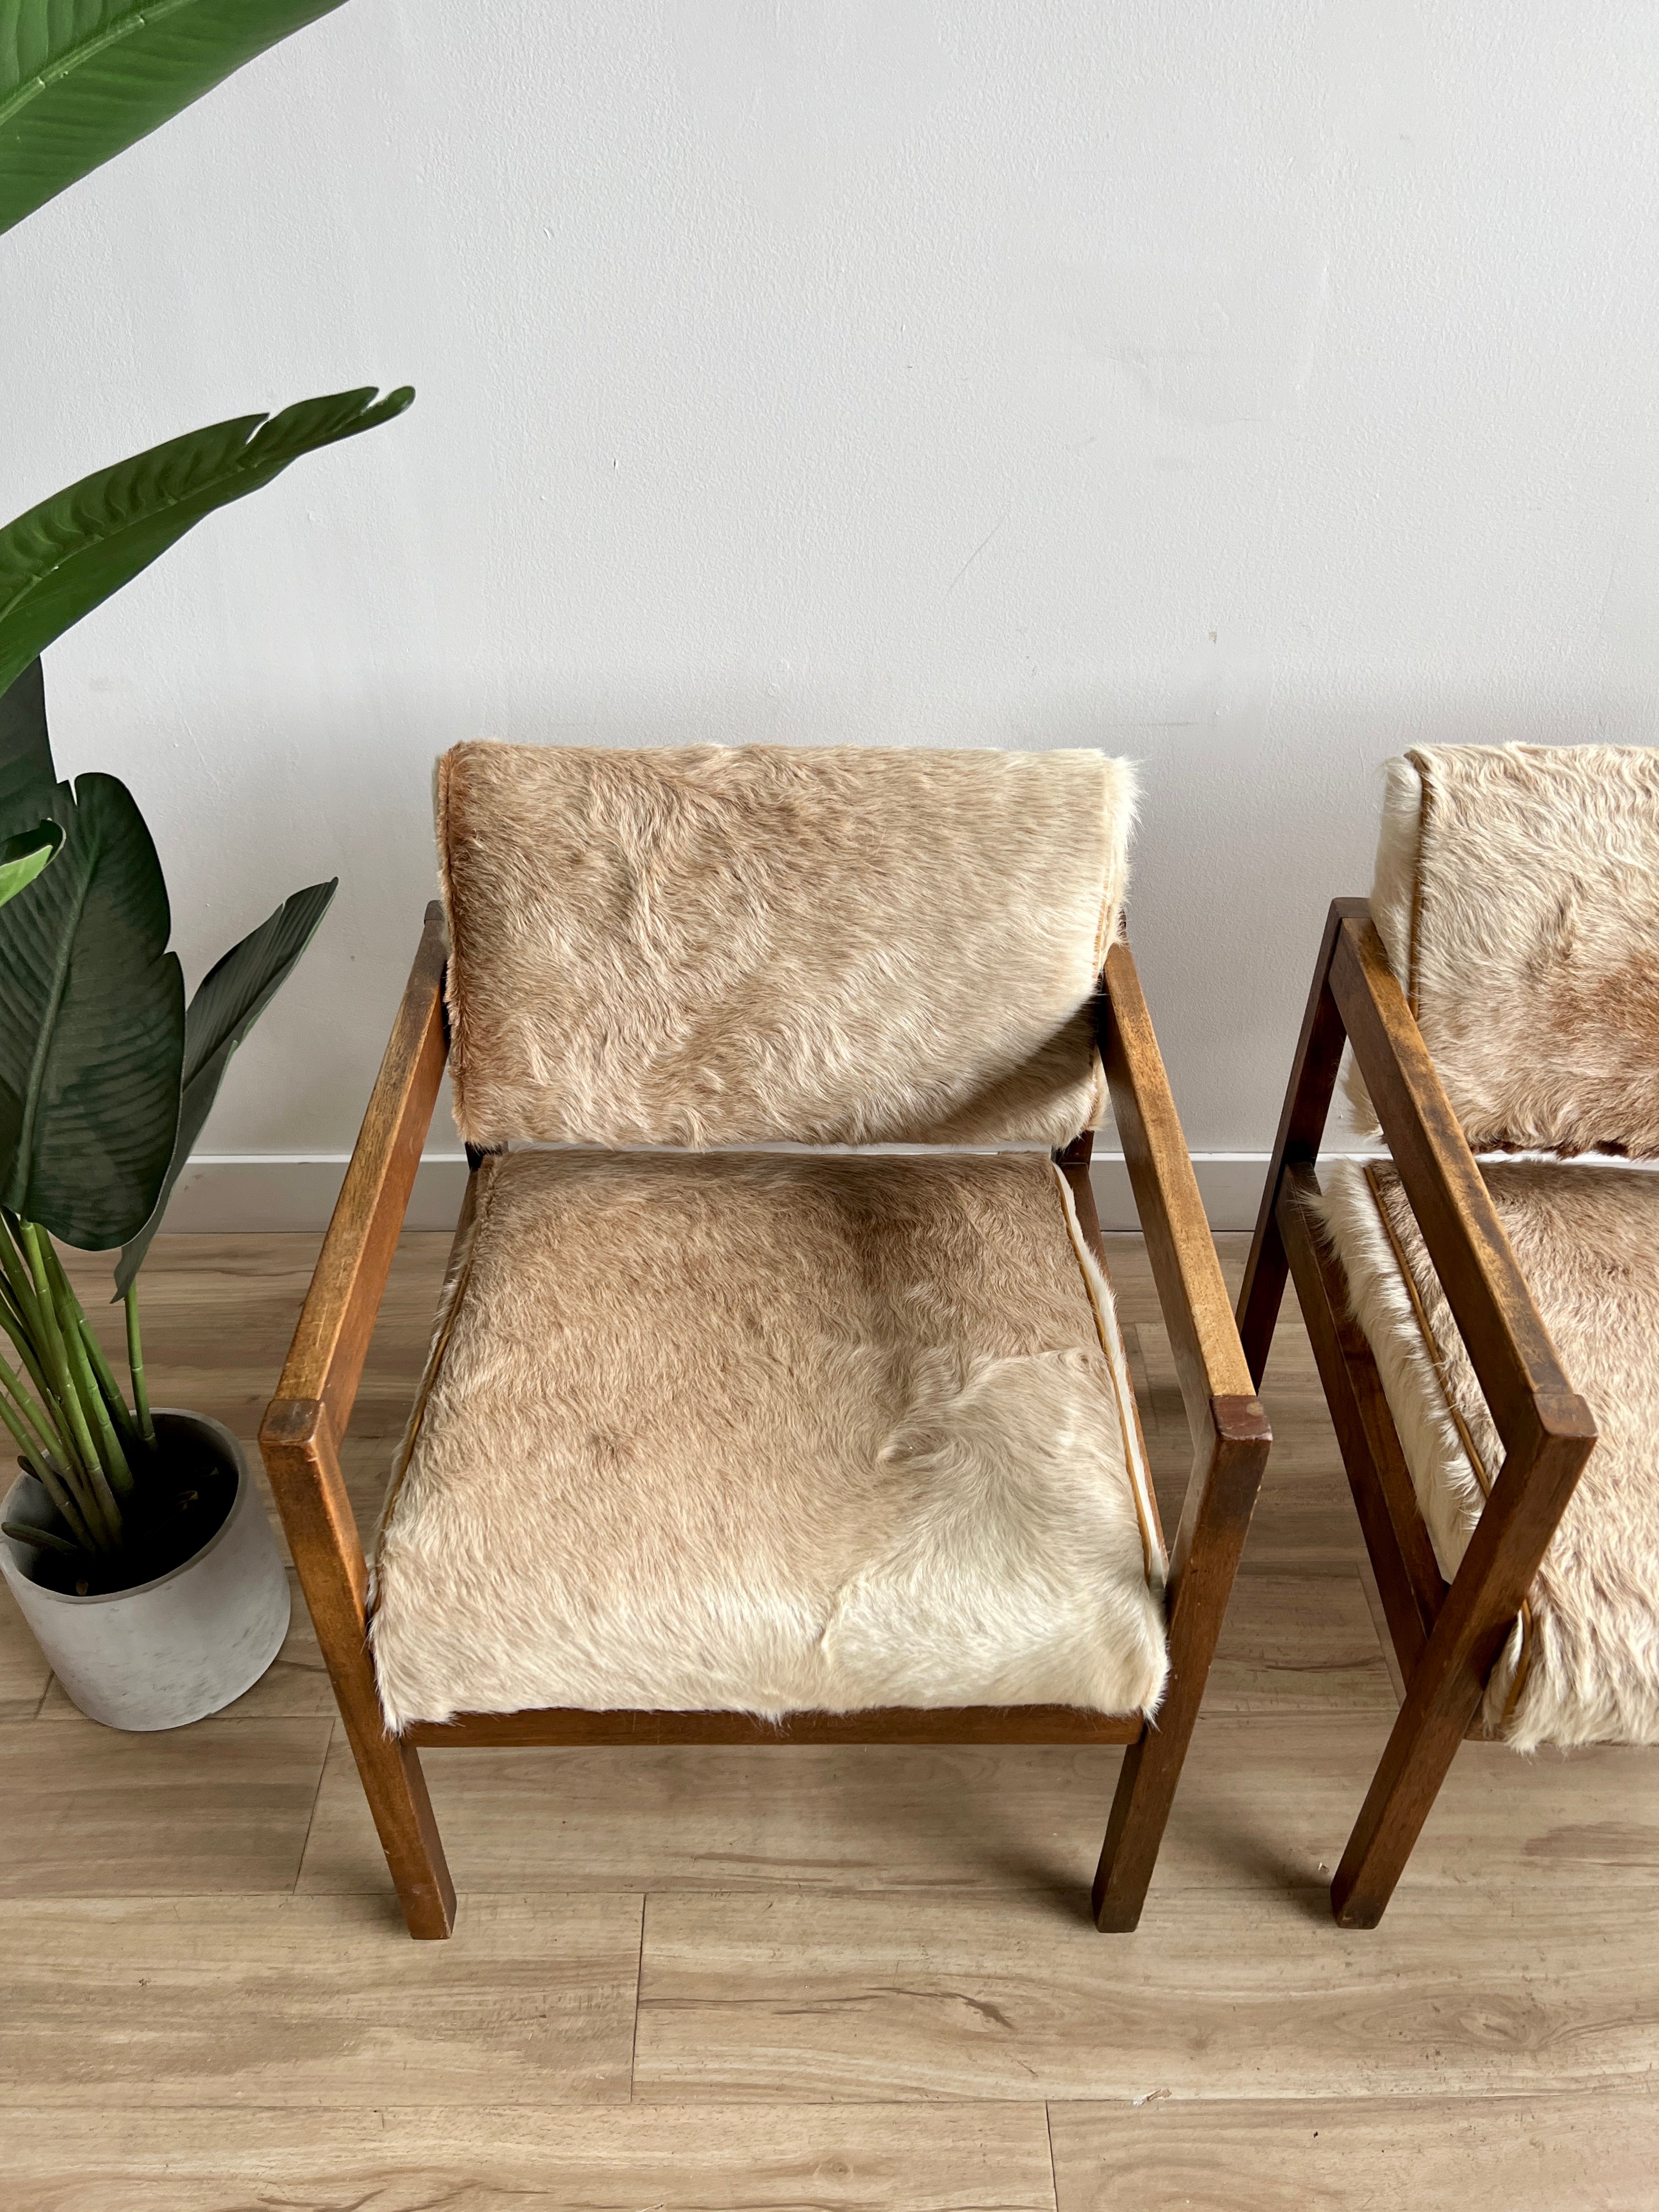 Pair of Vintage Mid Century Lounge Chairs Upholstered in Natural Cowhide